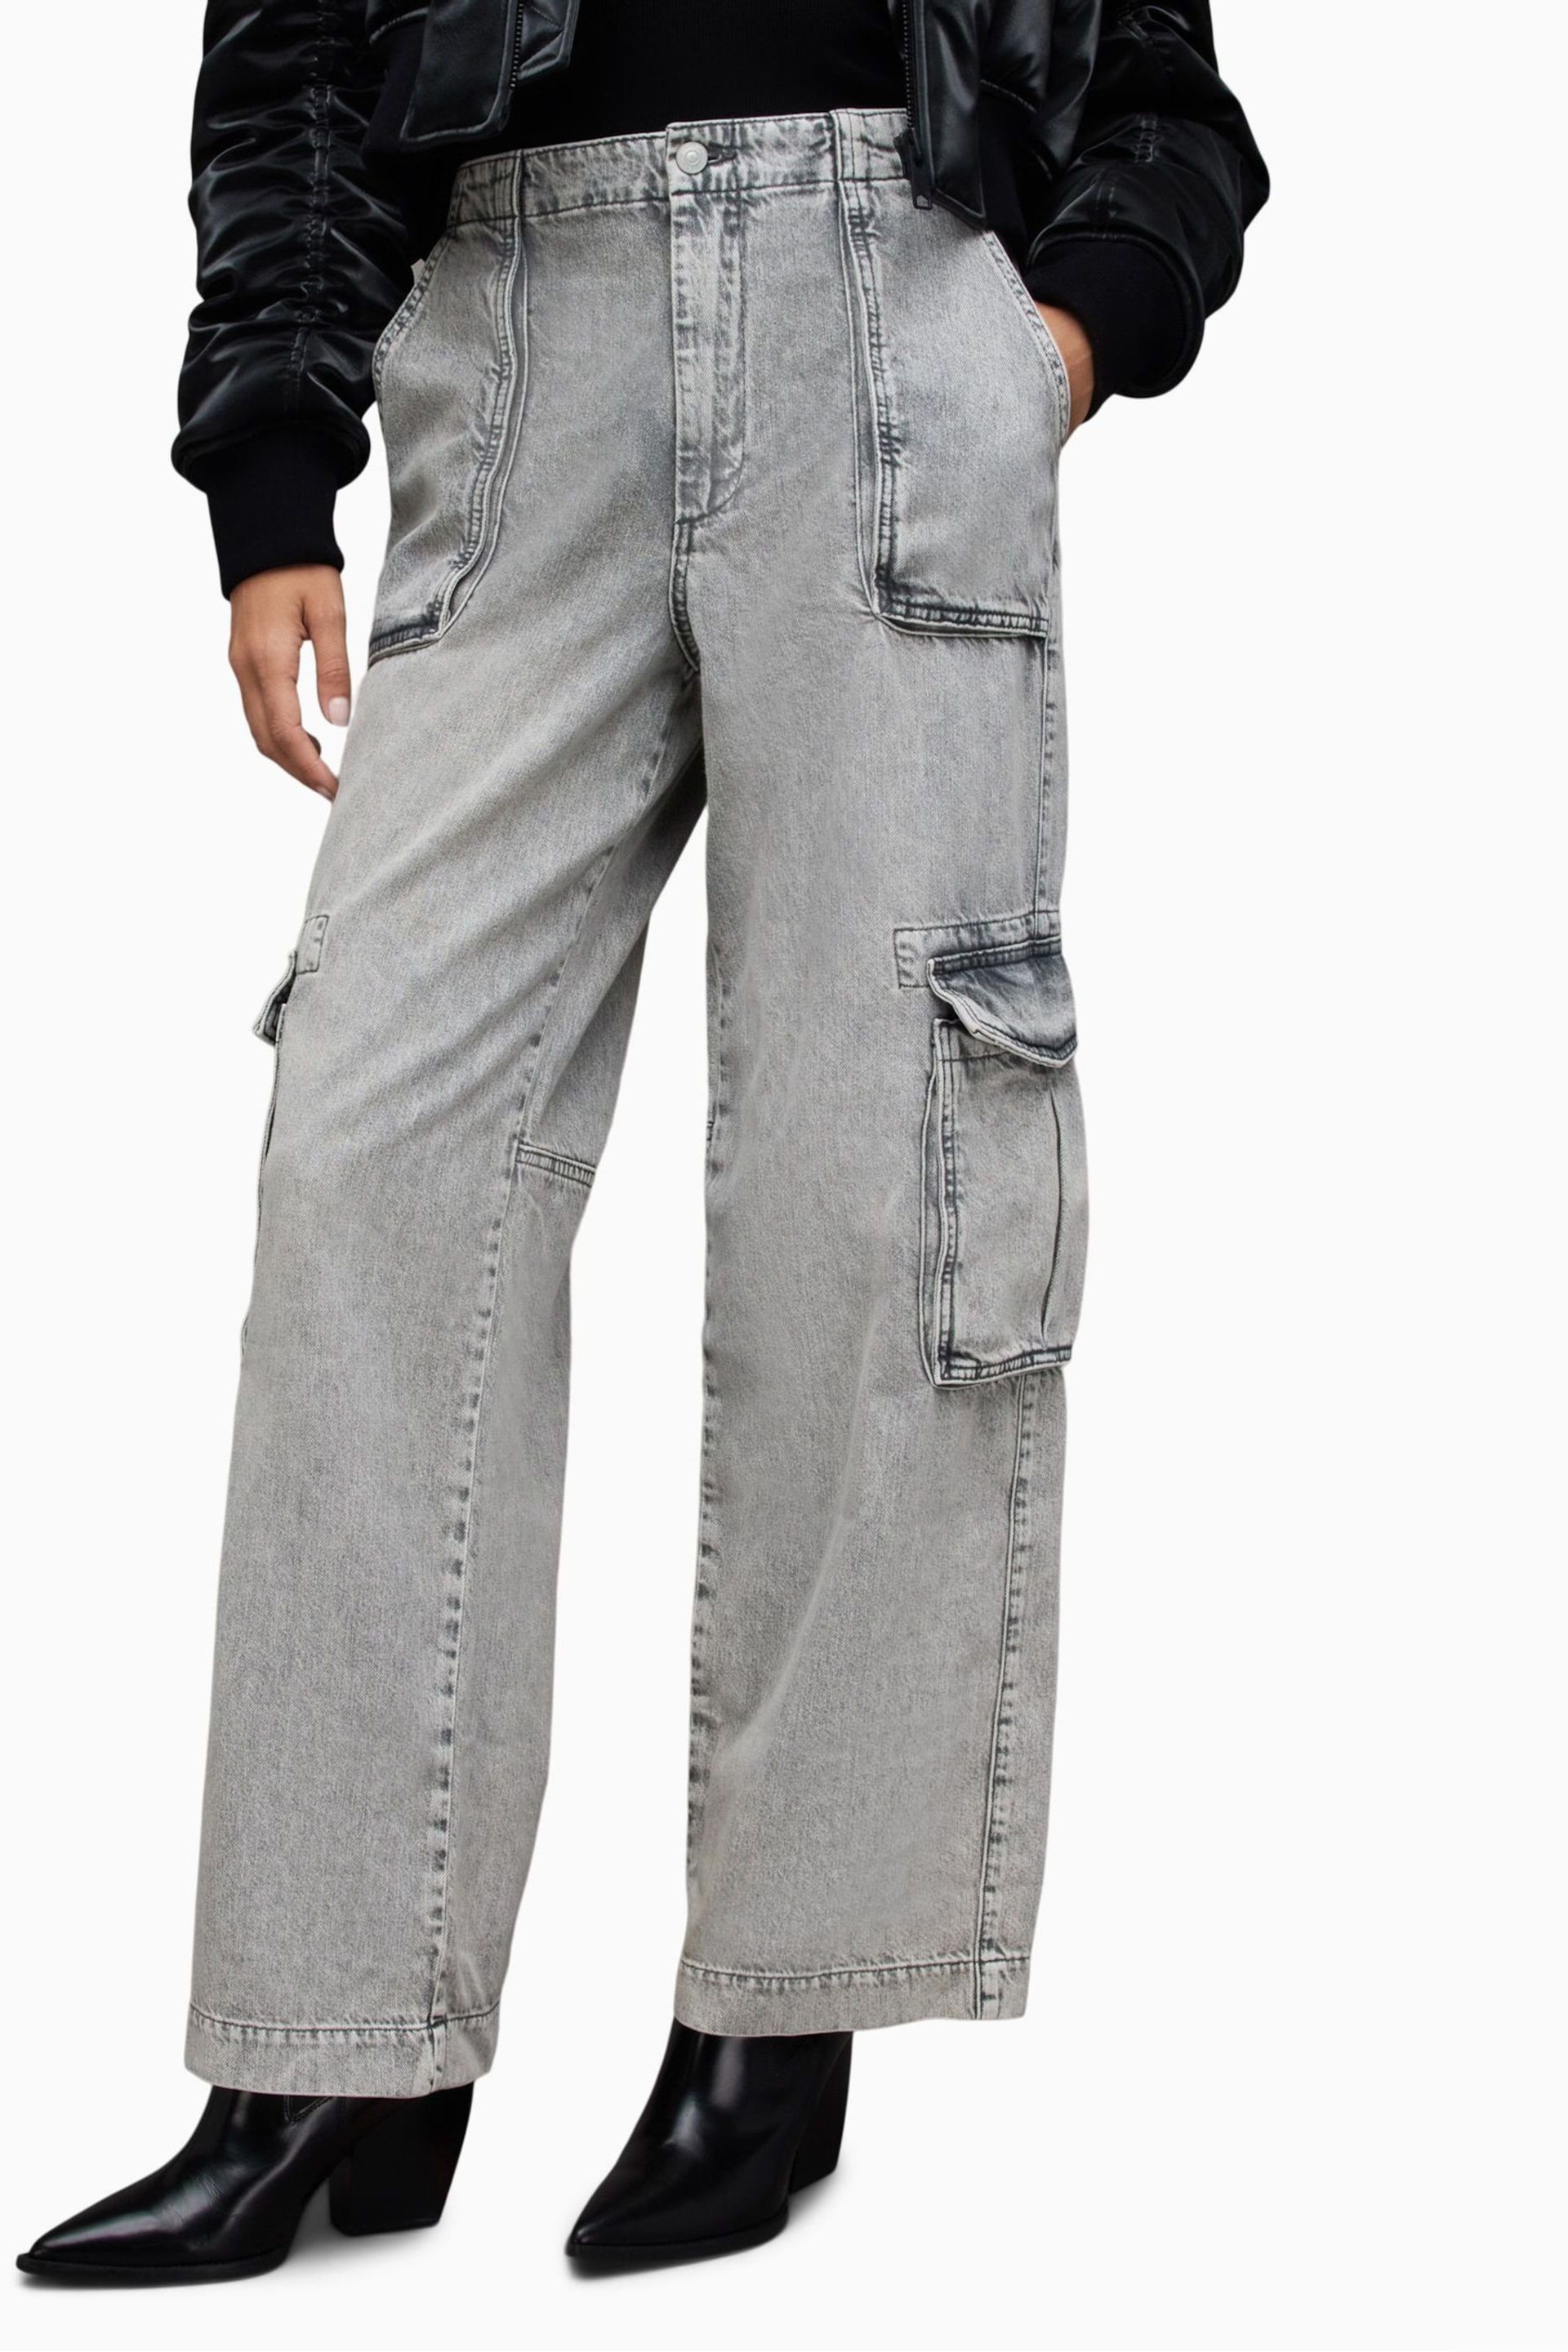 AllSaints Grey Frieda Straight Trousers - Image 1 of 7